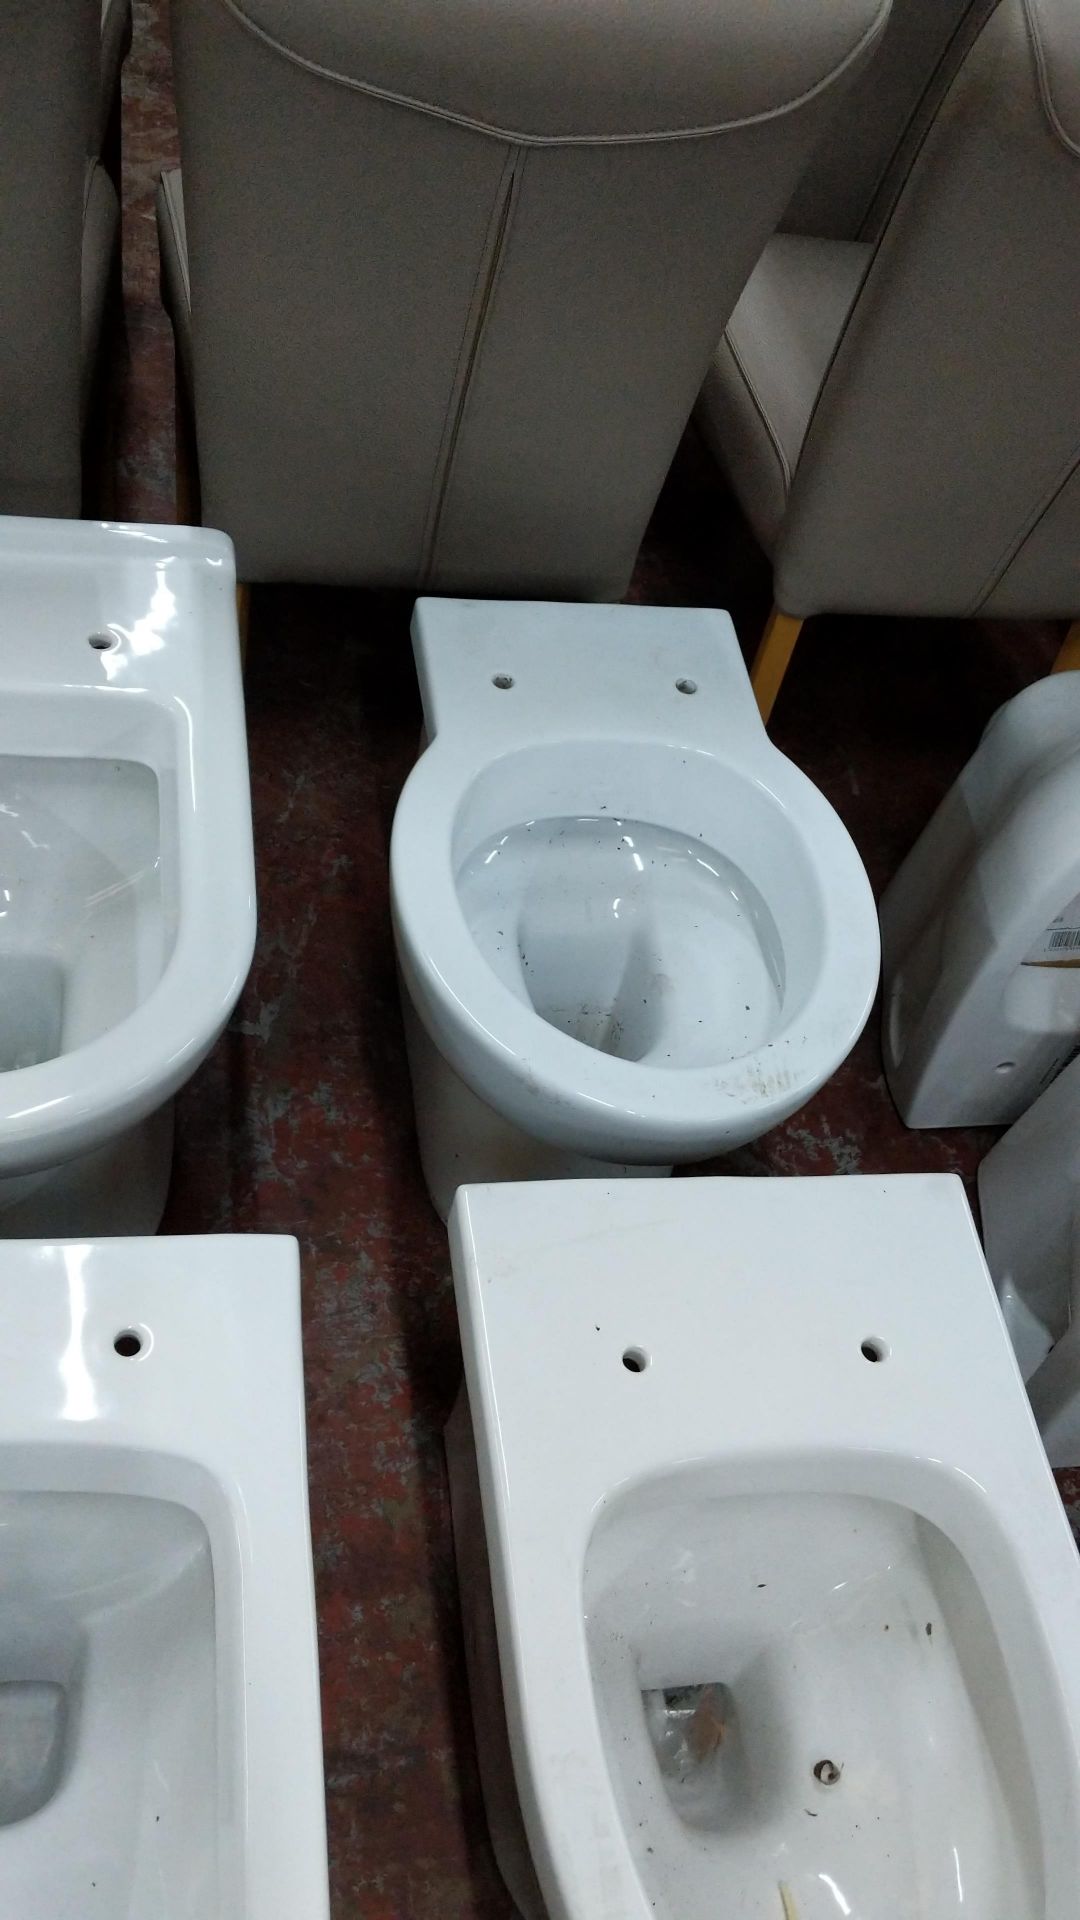 4 off assorted back-to-wall WC pans Lots 100 - 142 & 146 - 167 are being sold on behalf of a - Image 6 of 7